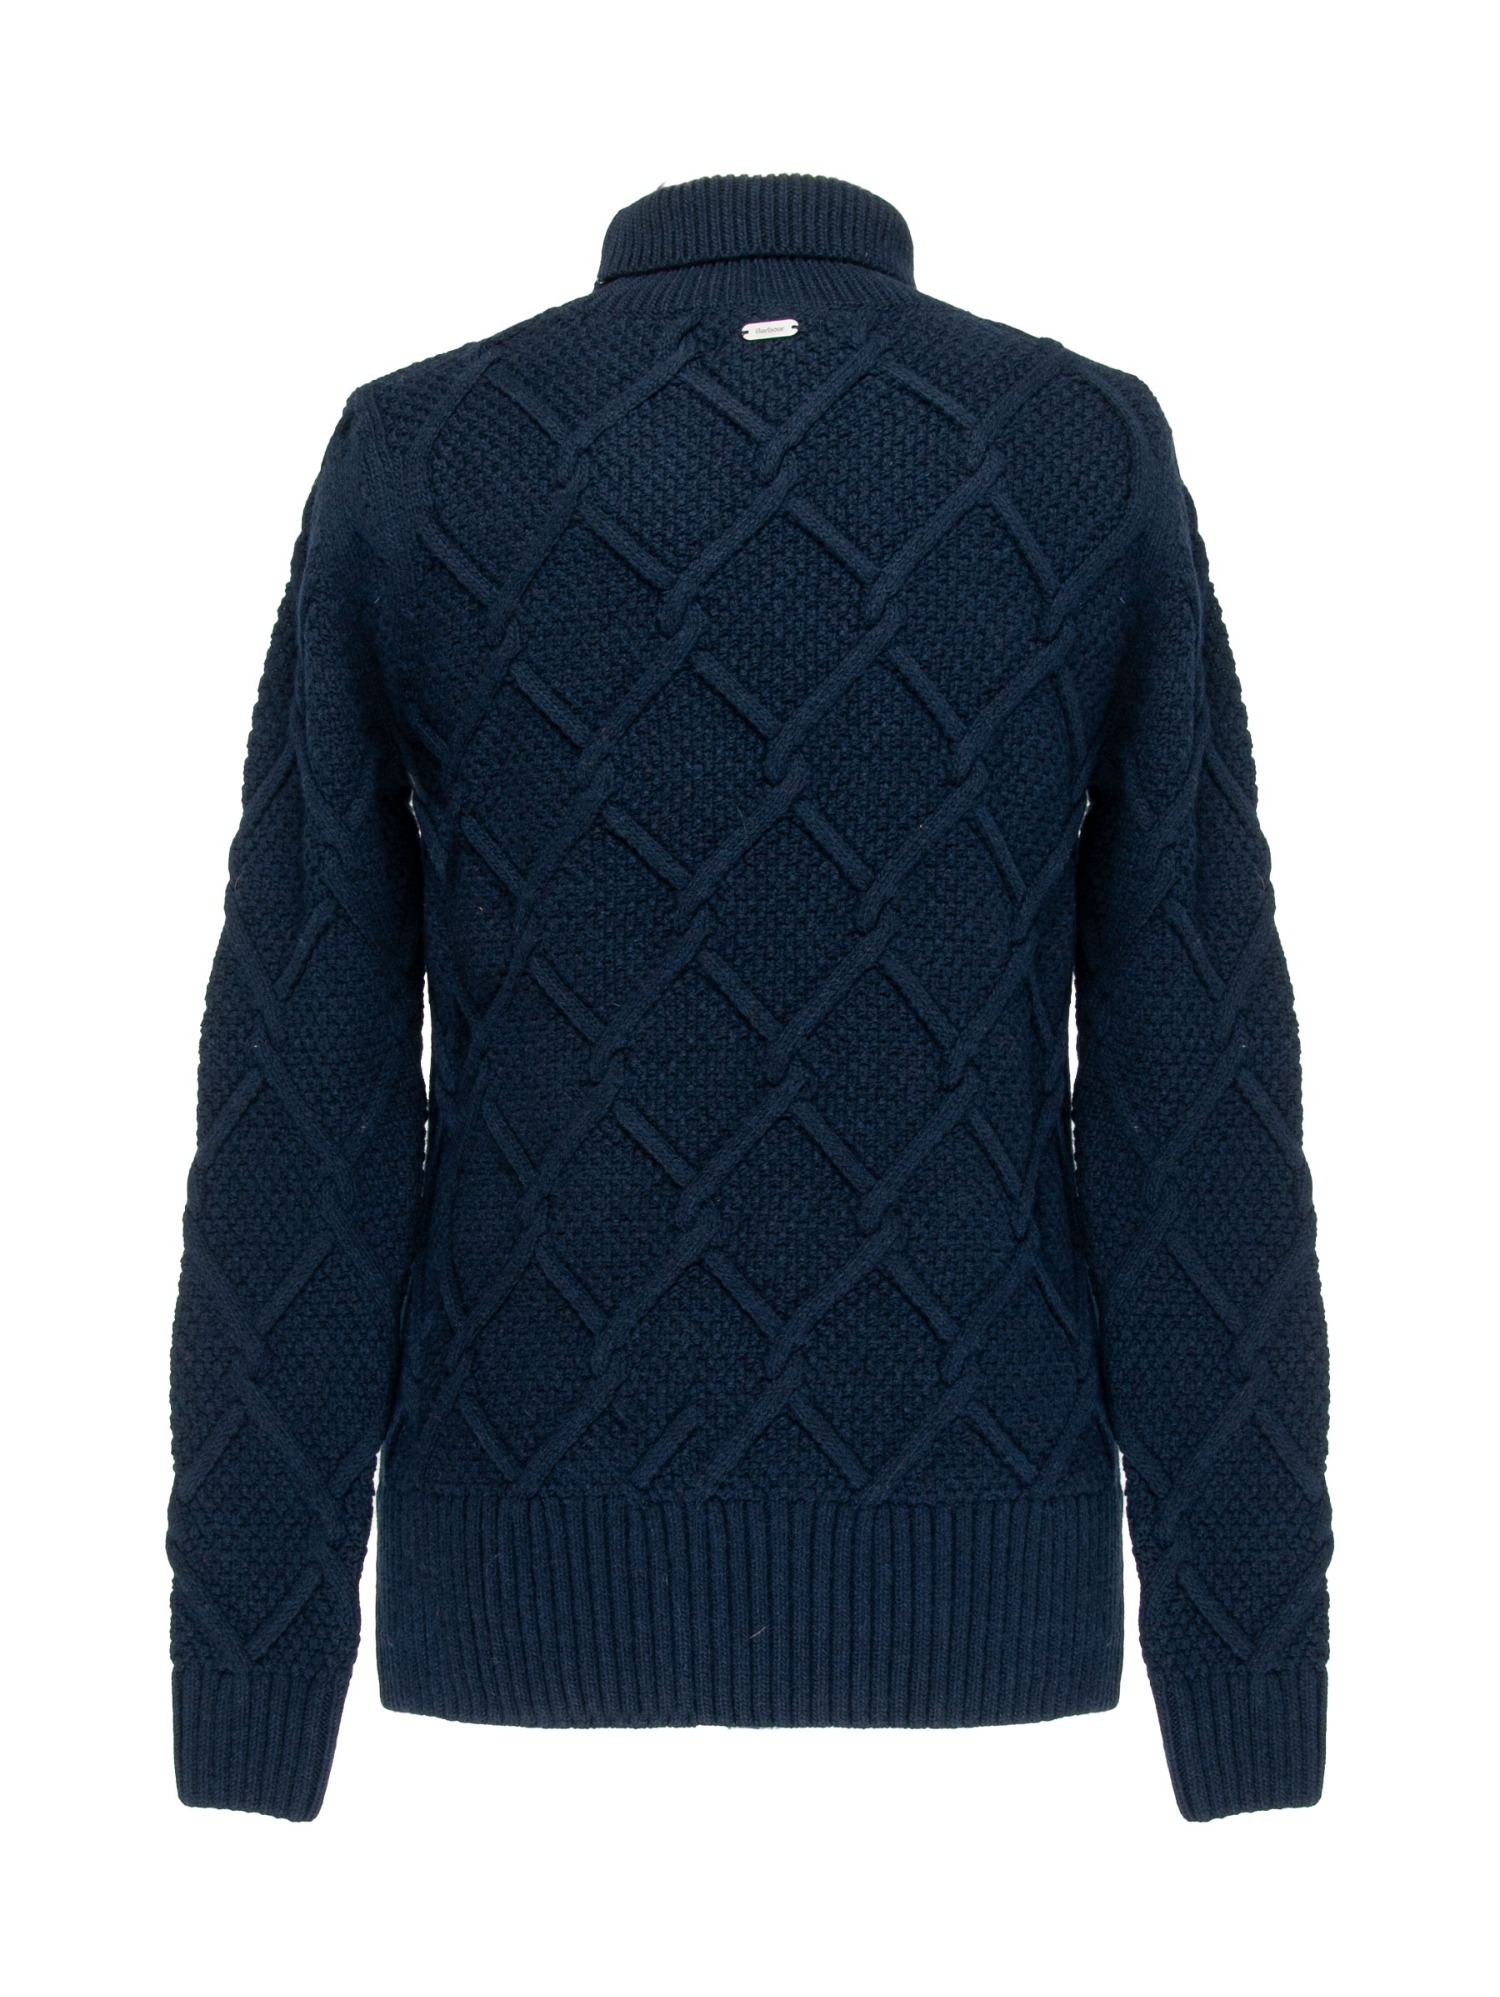 BARBOUR BURNE ROLL NECK KNITWE